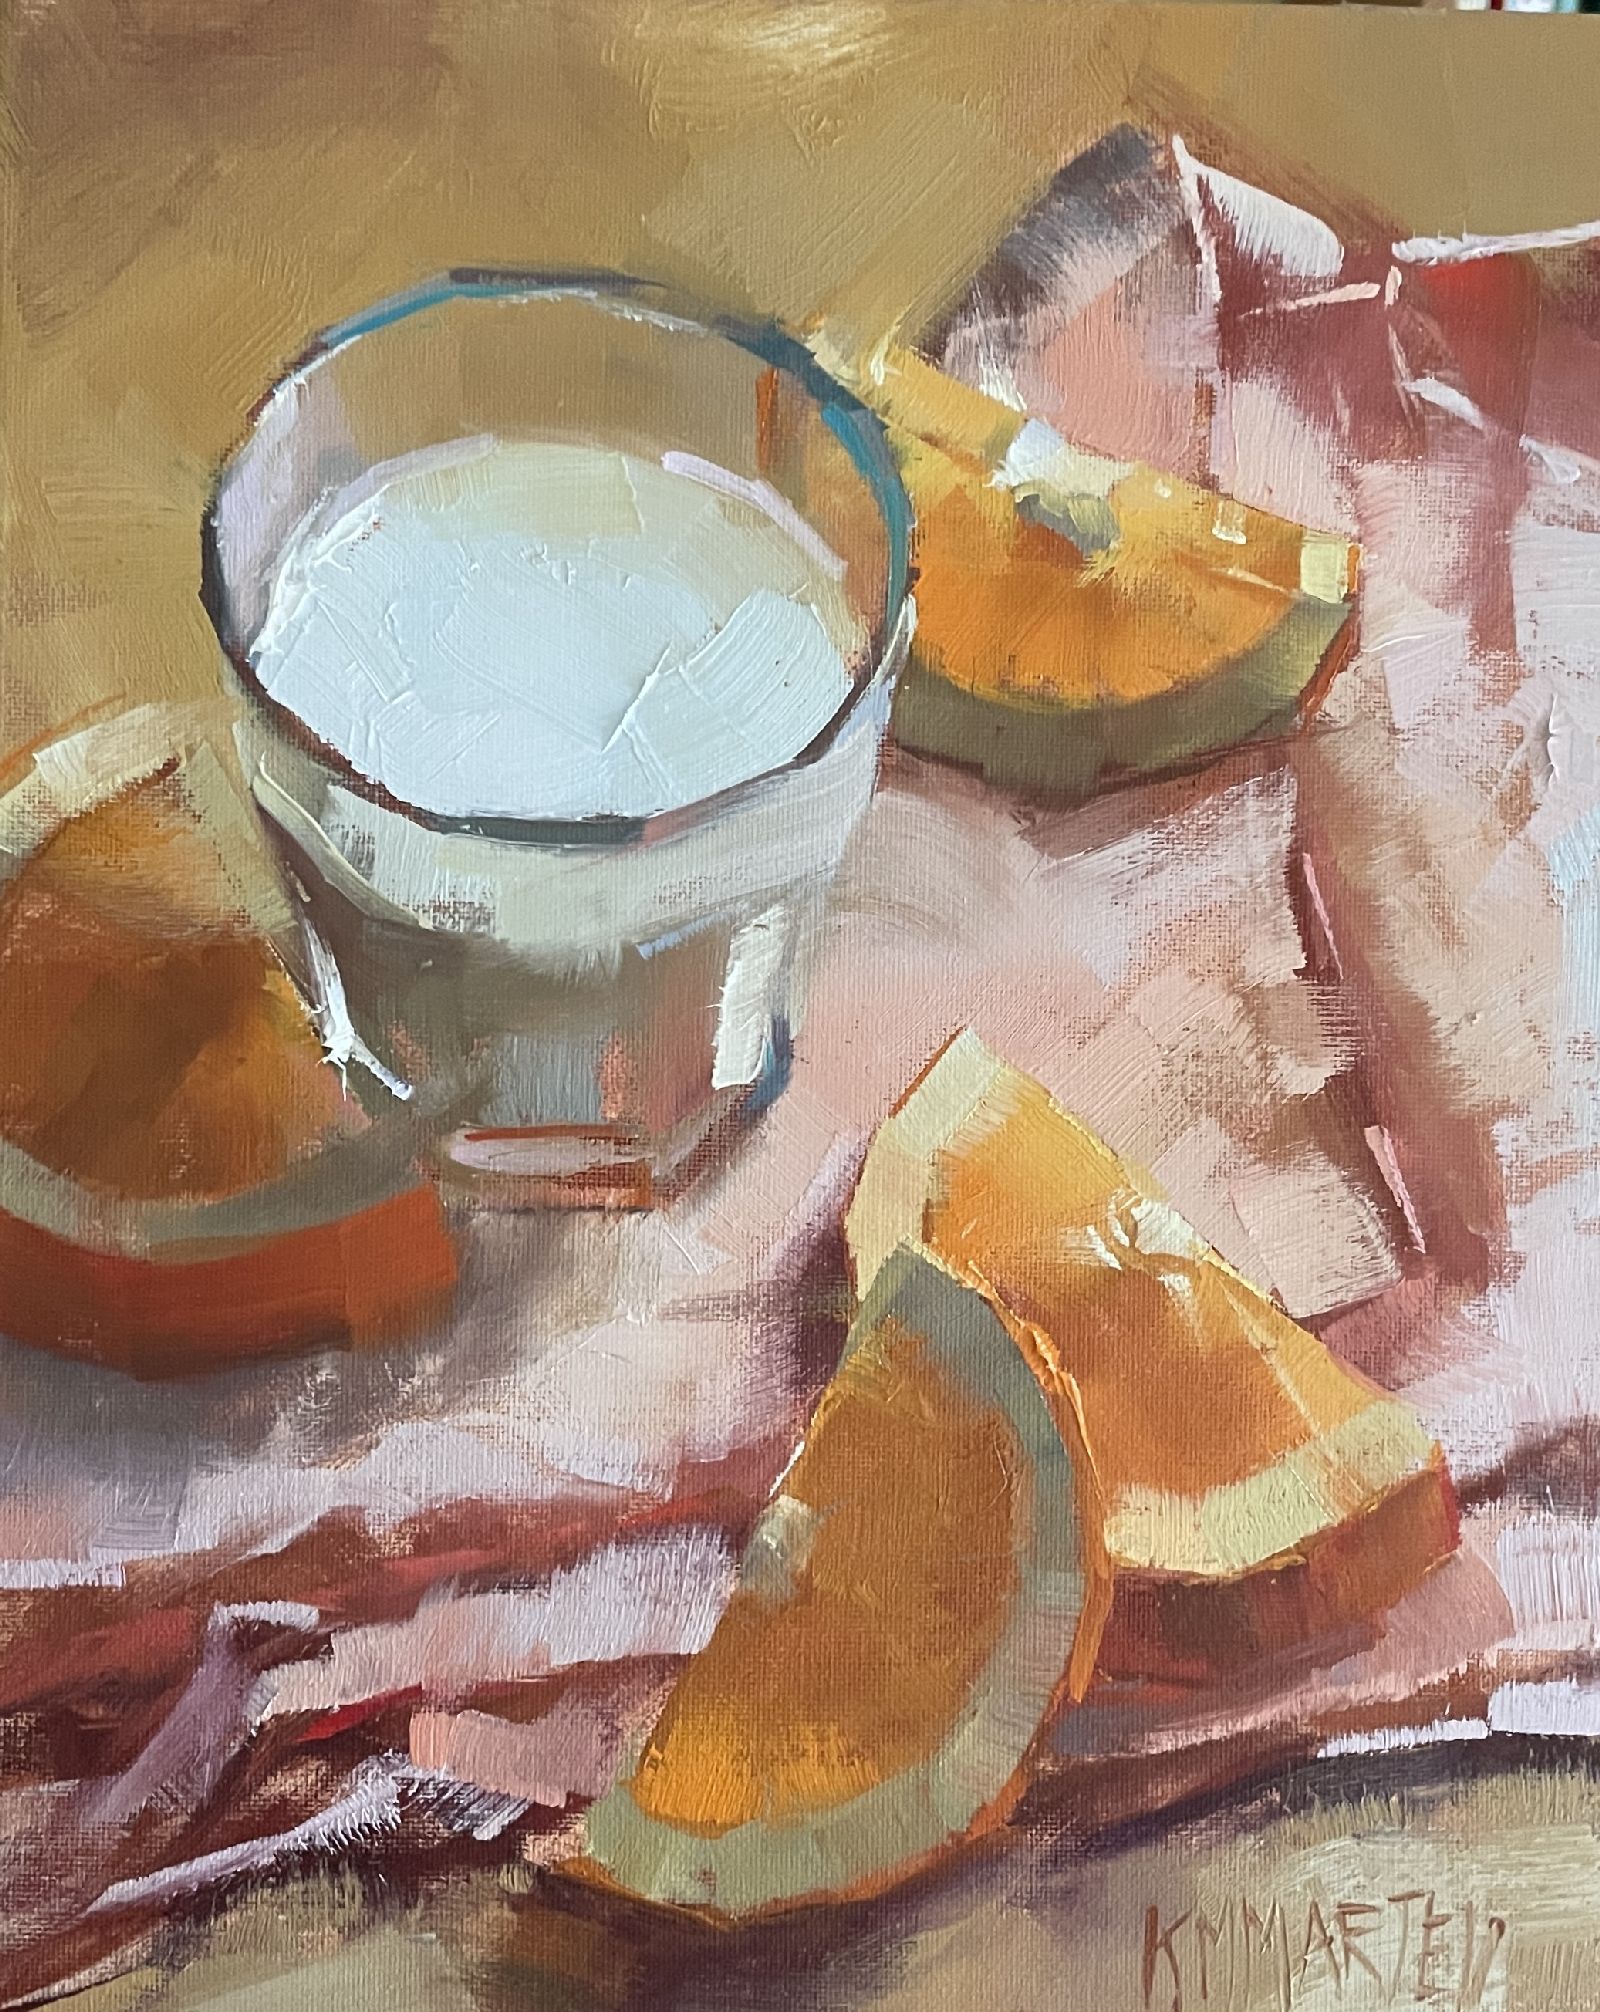 Kayla Martell - Oranges by the milk